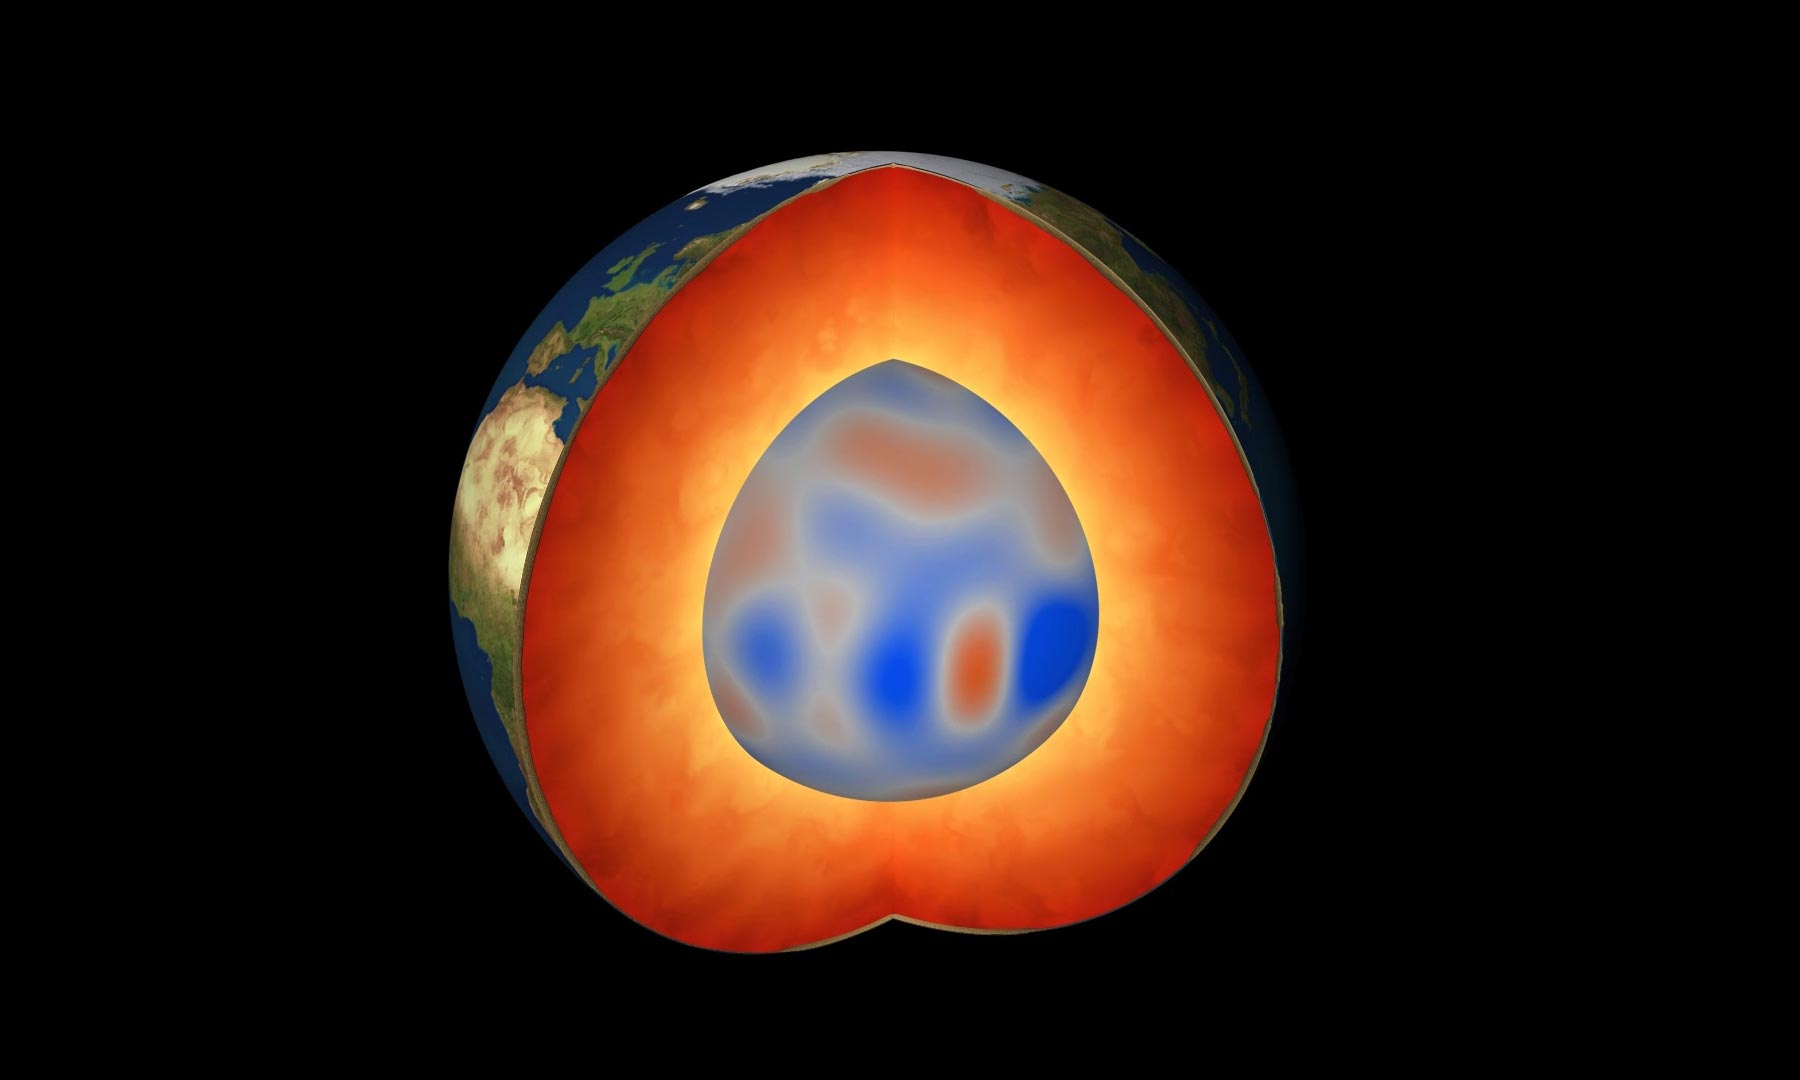 An entirely new type of magnetic wave sweeping through the Earth’s outer core has been discovered